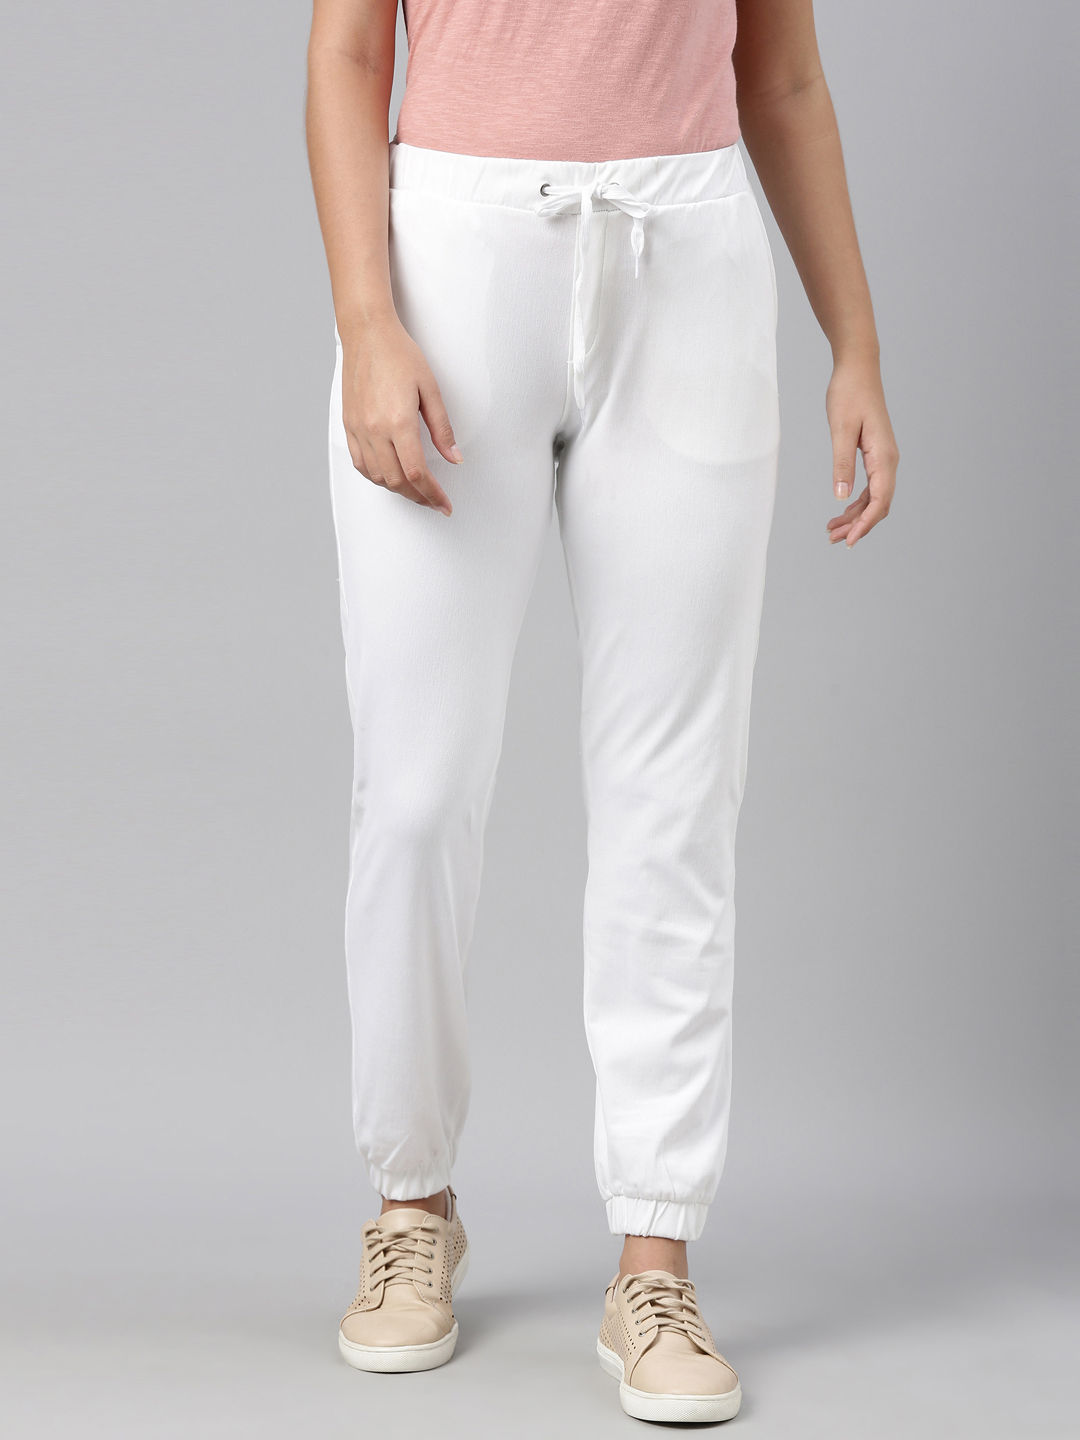 Buy SASSAFRAS Women White High Rise Pure Cotton Joggers  Trousers for Women  12222130  Myntra